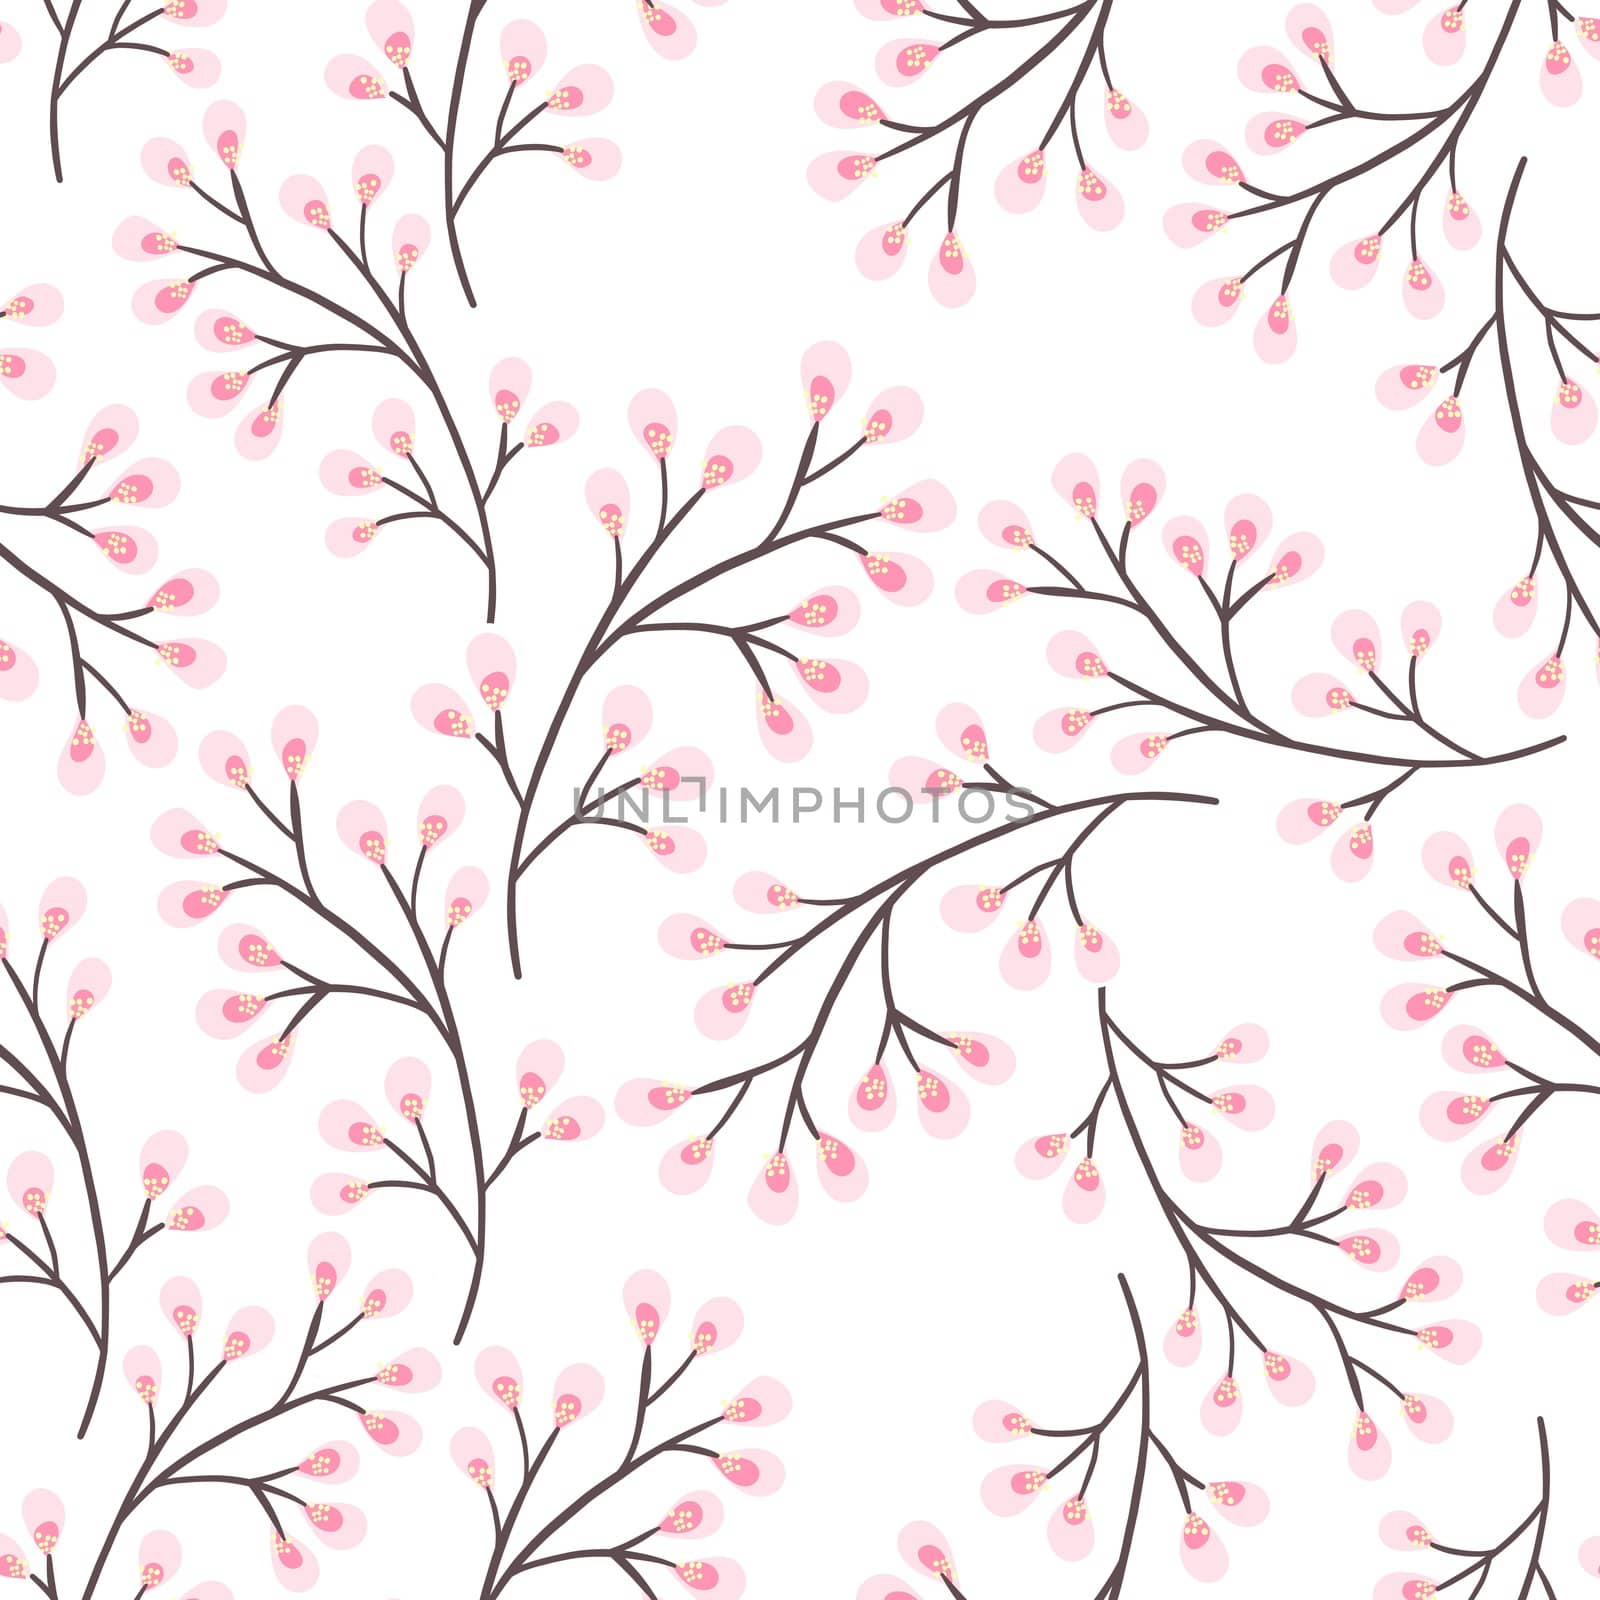 Pretty whimsical Cherry Blossom patterns, with buds now sprouting